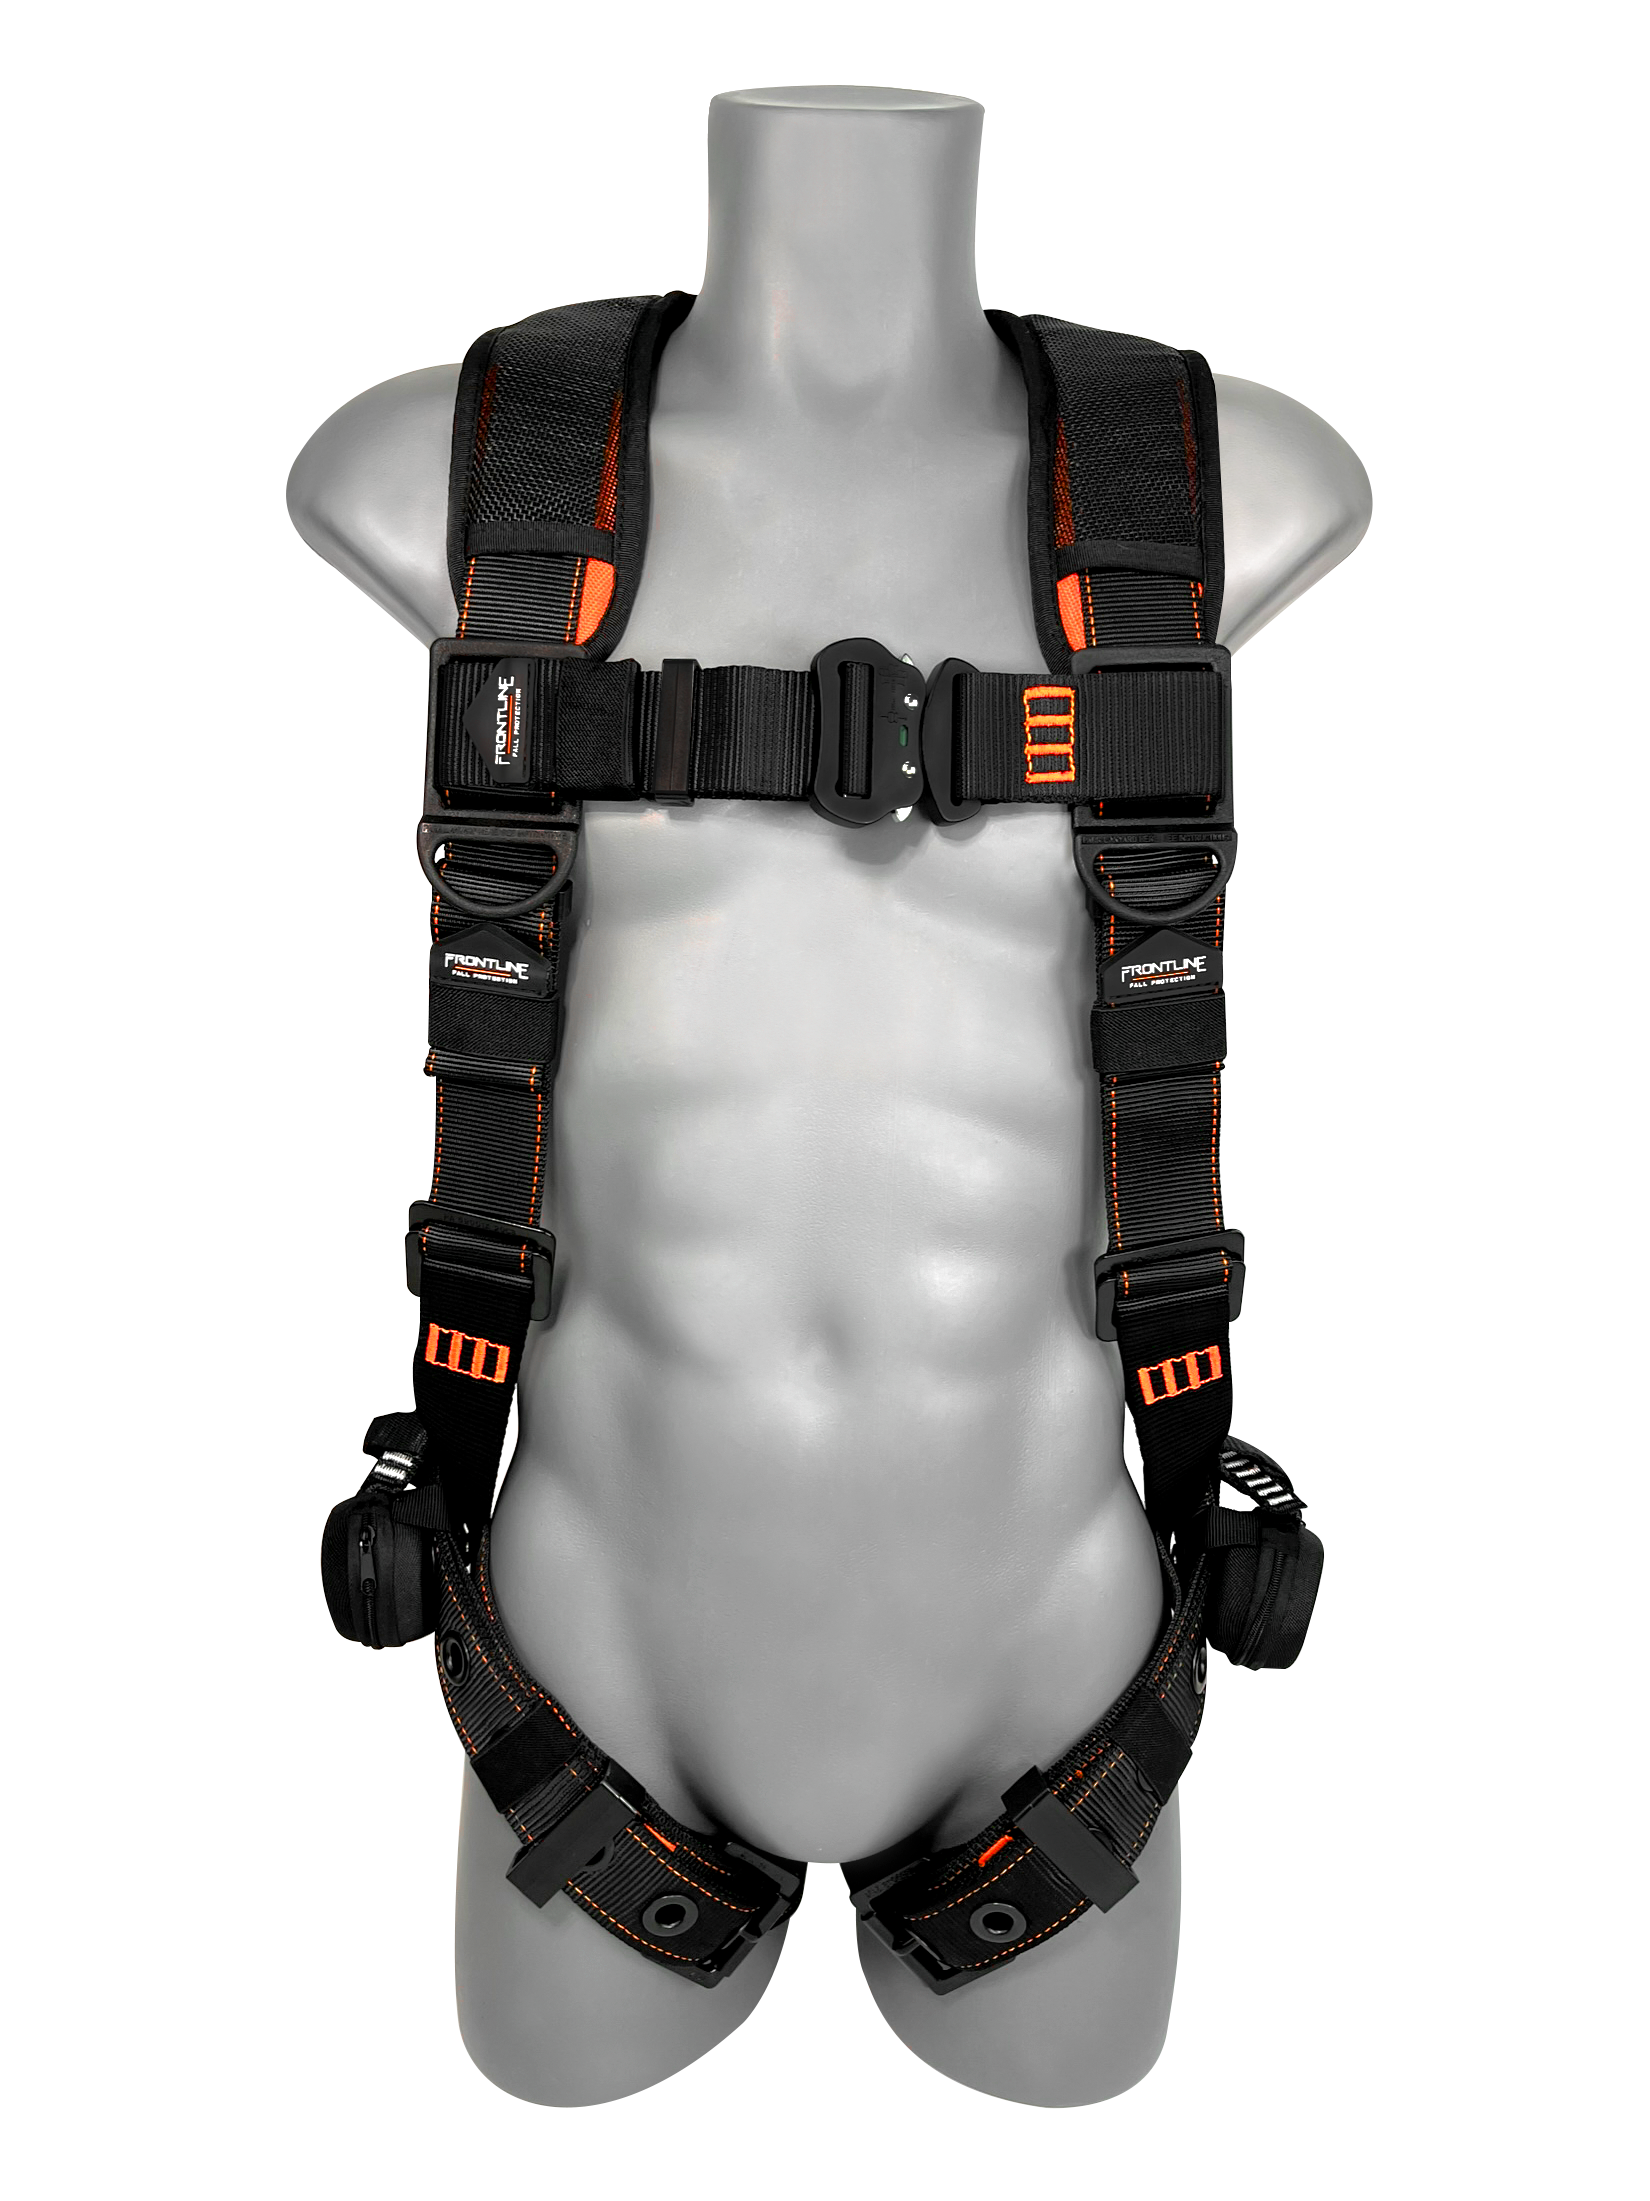 110VTB-3X/4X Combat Lite Vest Style Harness with Aluminum Hardware and Suspension Trauma Straps